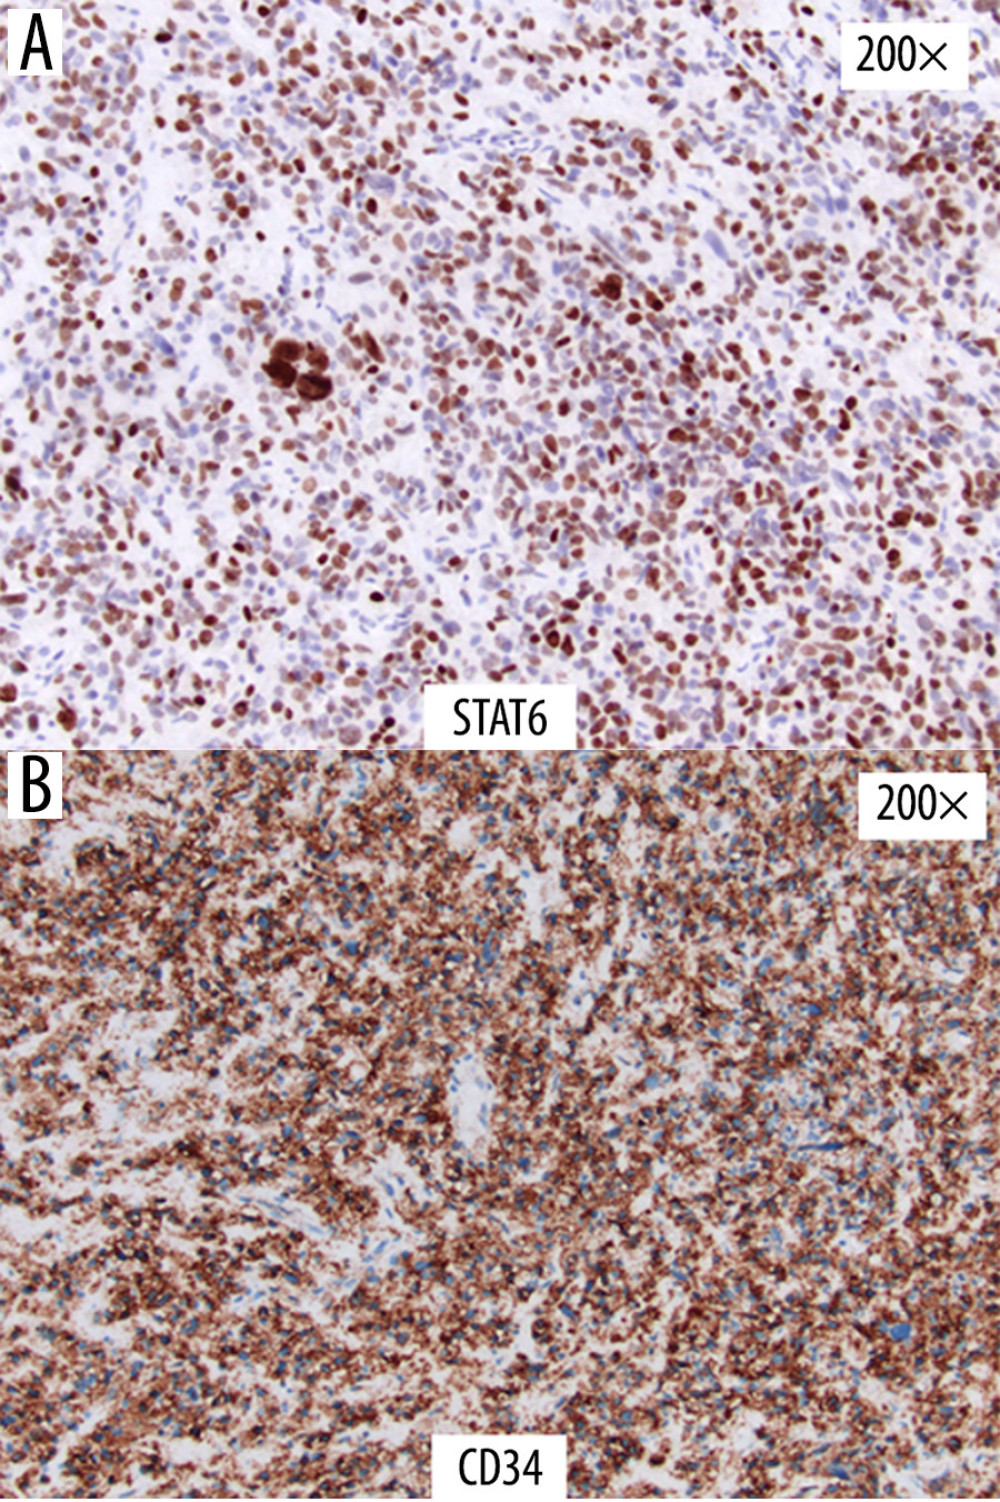 (A) Immunohistochemical stains including STAT6, which is highly sensitive and specific for solitary fibrous tumors, and (B) CD34 are positive in the tumor cells, supporting the diagnosis of SFT.